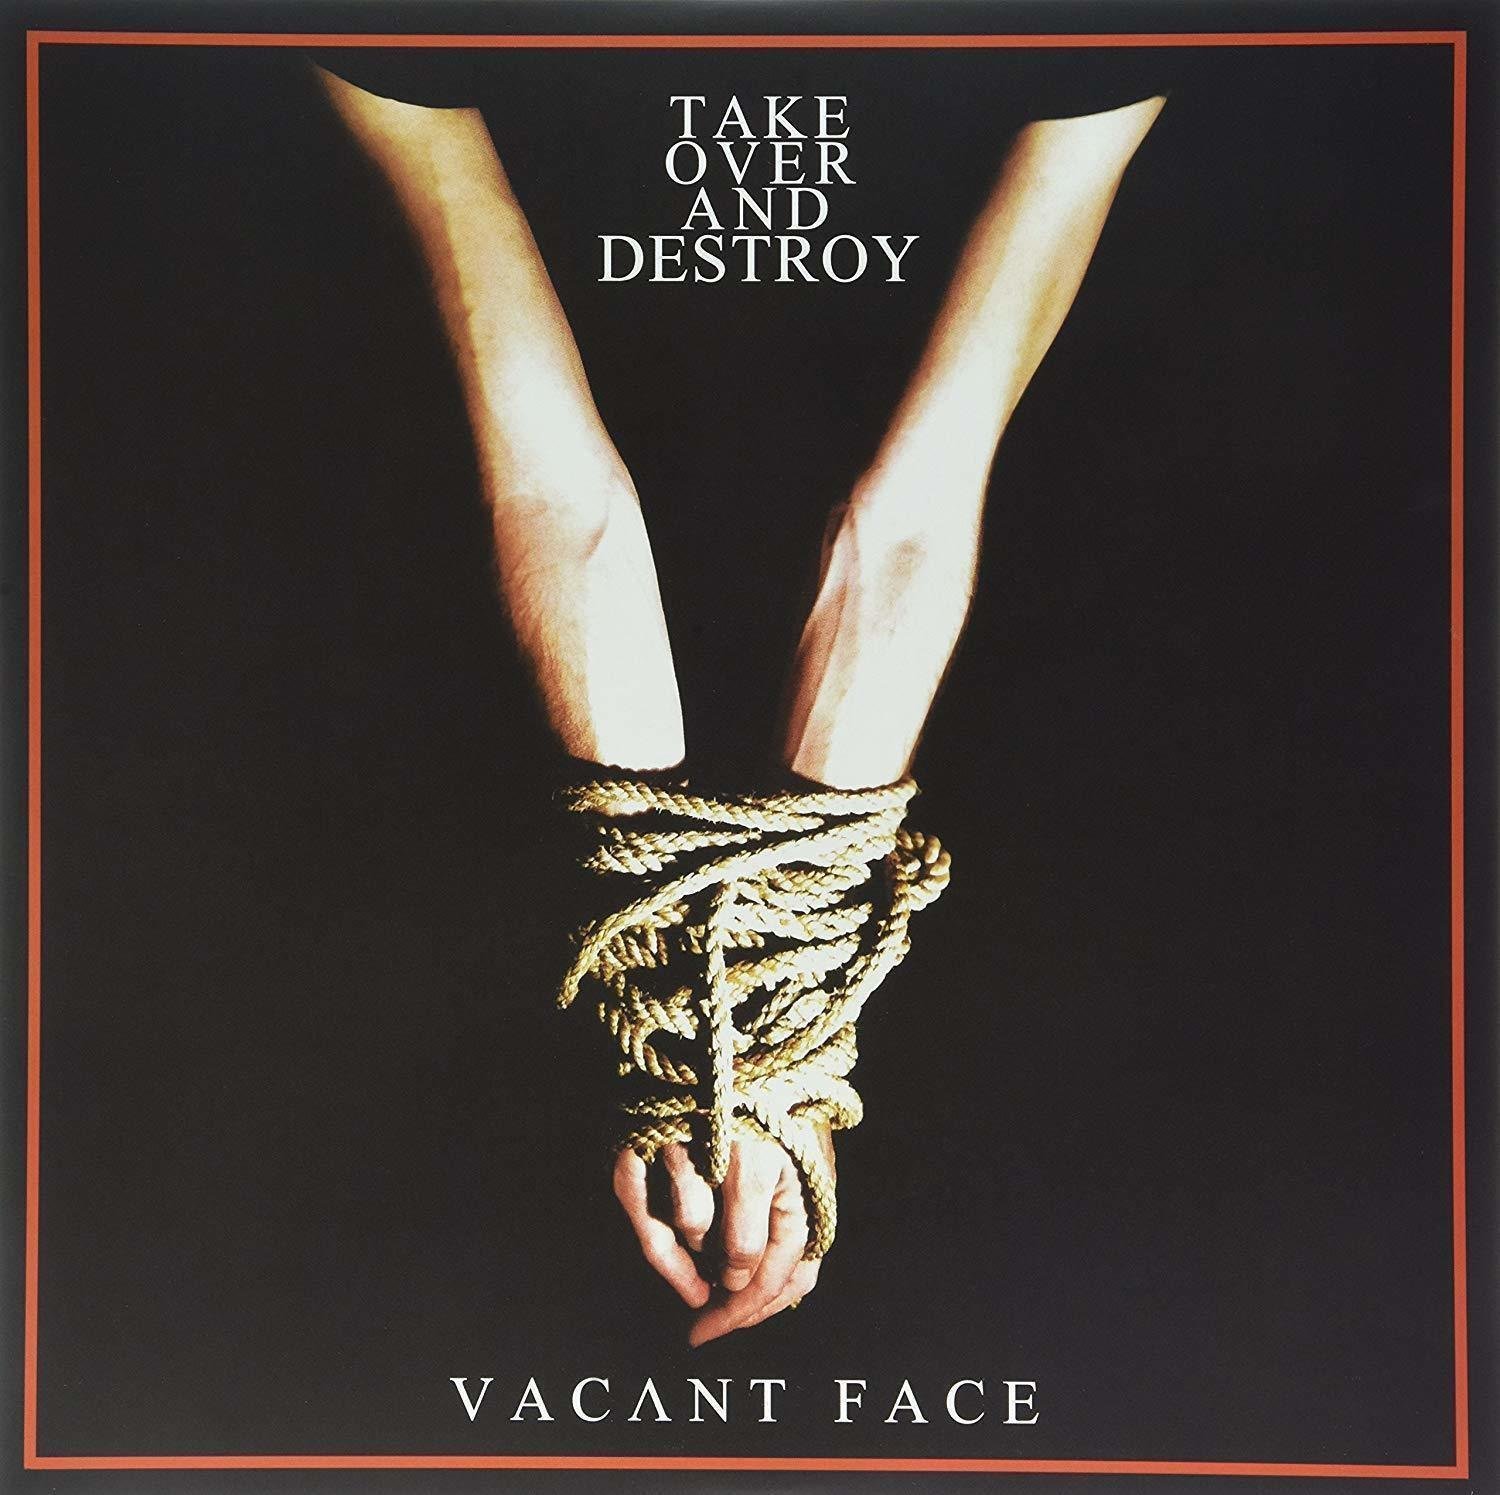 Vinylskiva Take Over And Destroy - Vacant Face (LP)